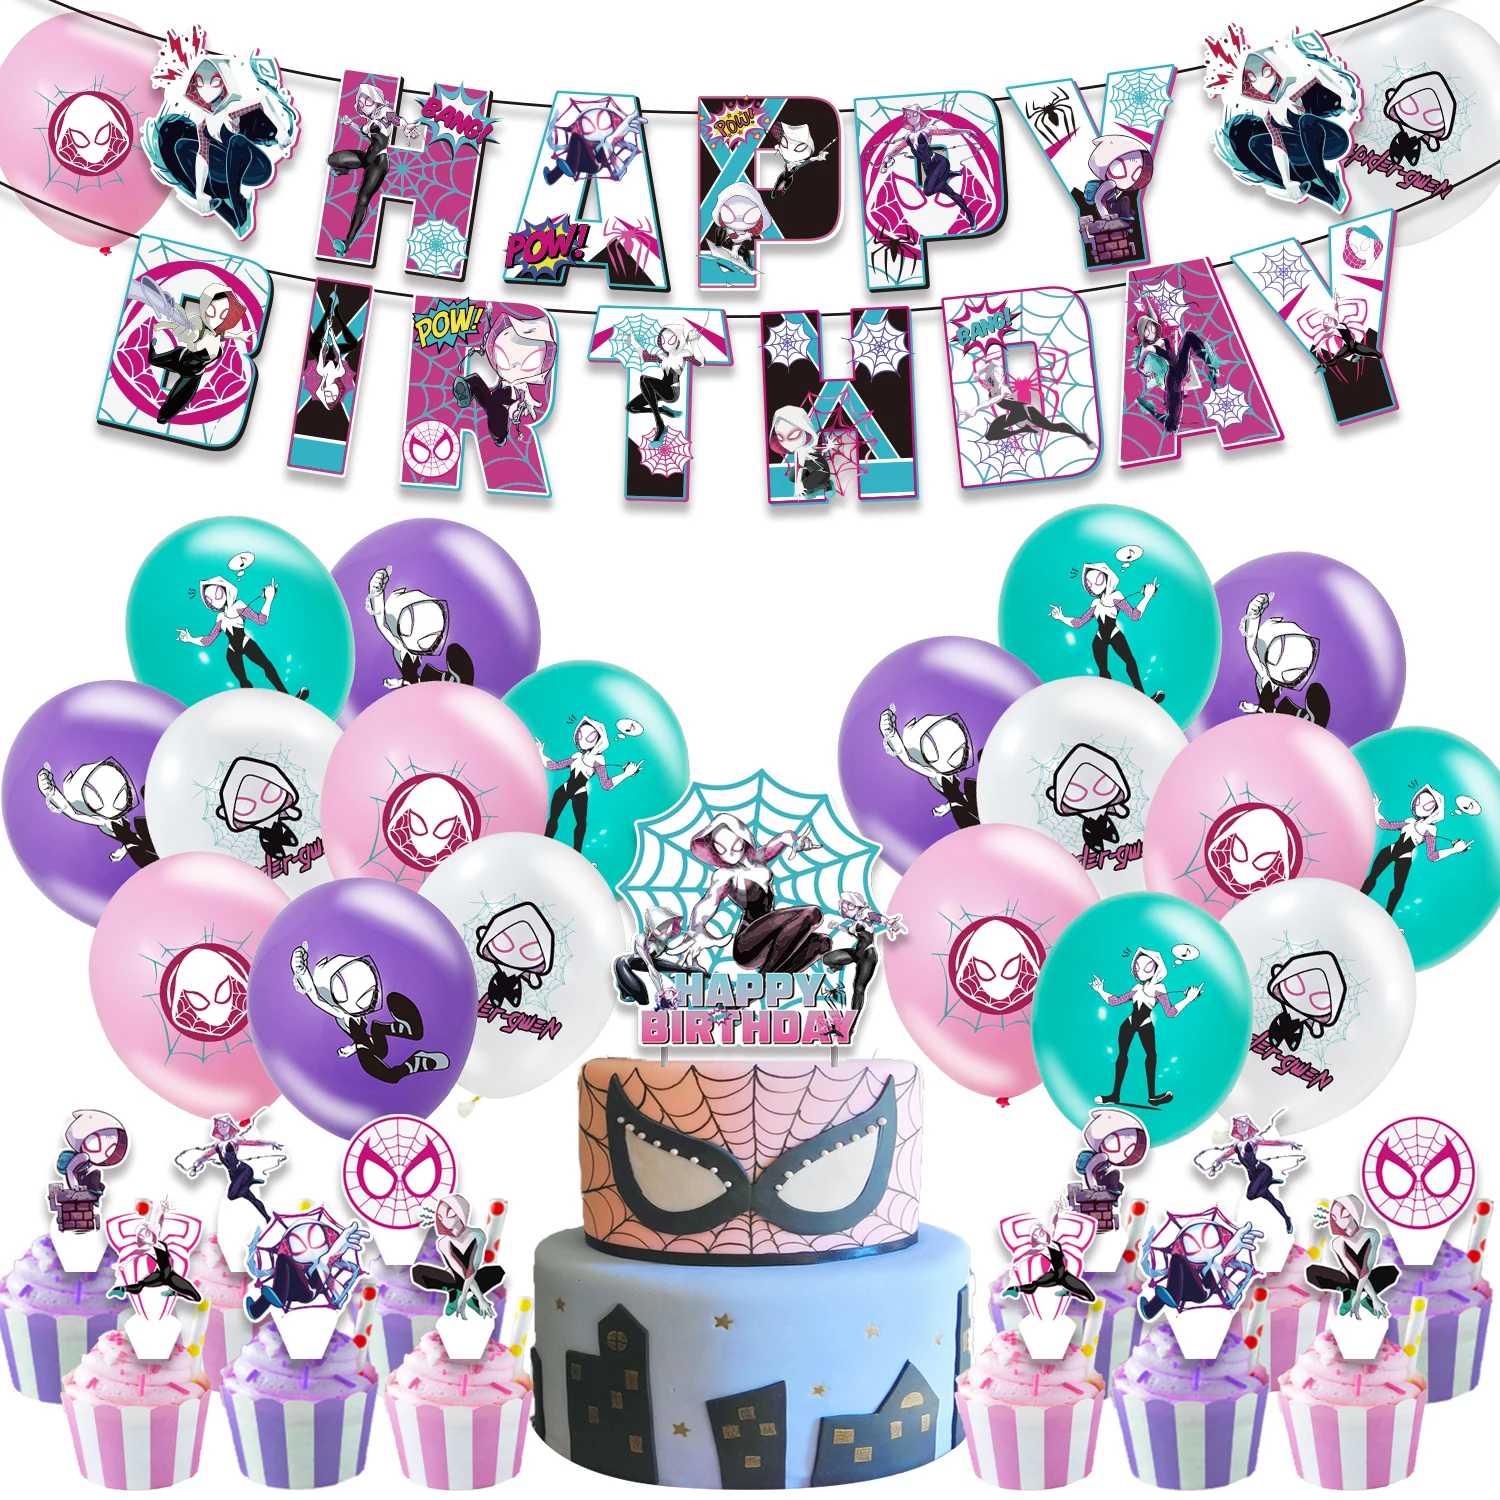 

Cartoon Spider Gwen Theme Birthday Party Decorations For Girls Paper Banner Balloons Cupcake Topper Birthday Party Supplies